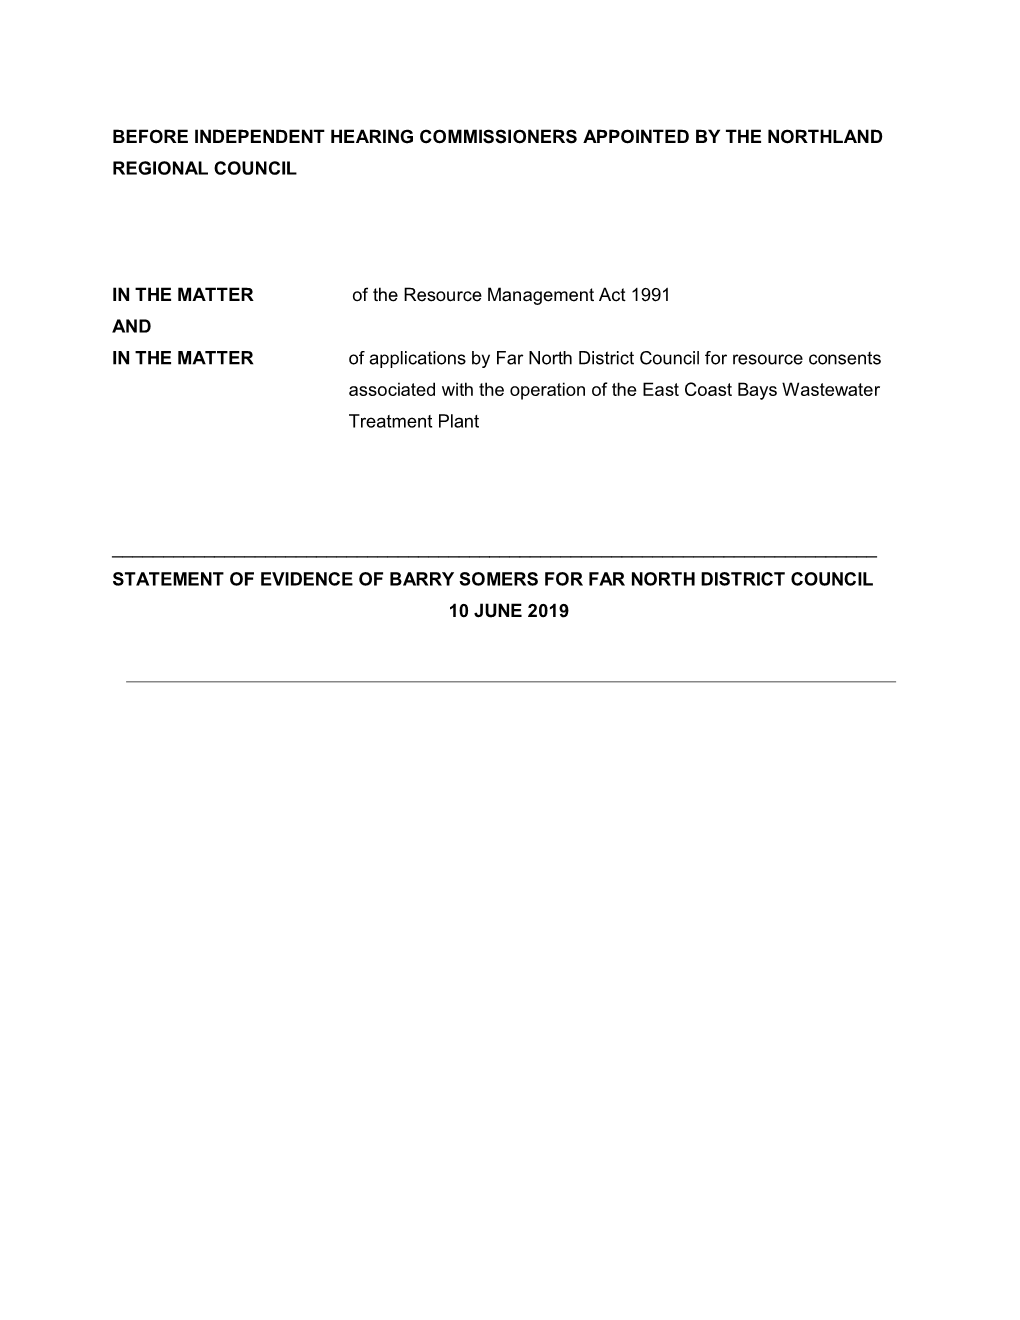 STATEMENT of EVIDENCE of BARRY SOMERS for FAR NORTH DISTRICT COUNCIL 10 JUNE 2019 Qualifications and Experience